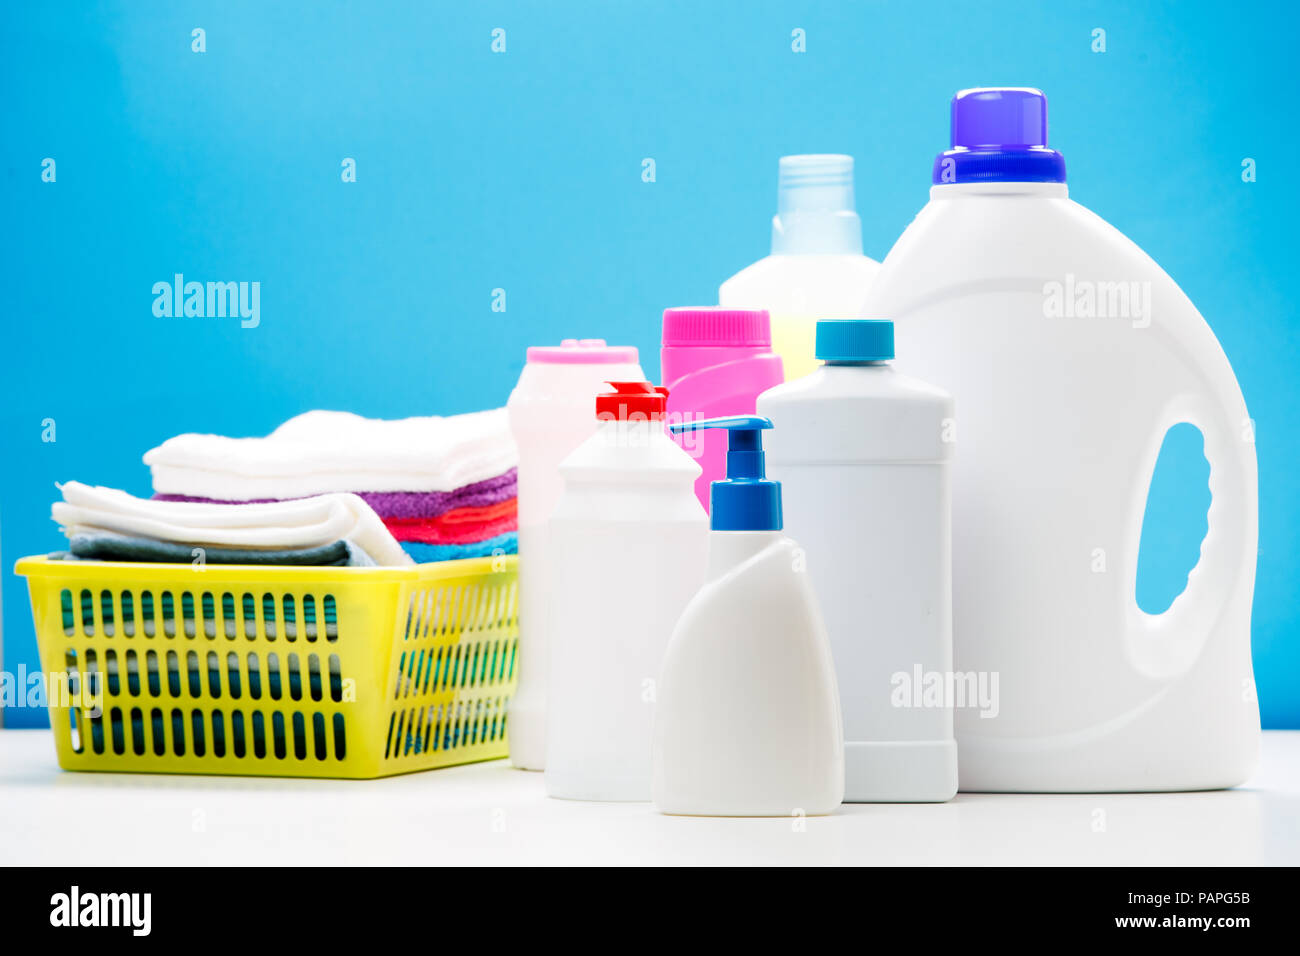 https://c8.alamy.com/comp/PAPG5B/photo-of-different-bottles-of-cleaning-products-and-colored-towels-in-basket-isolated-on-blue-background-place-for-inscription-PAPG5B.jpg